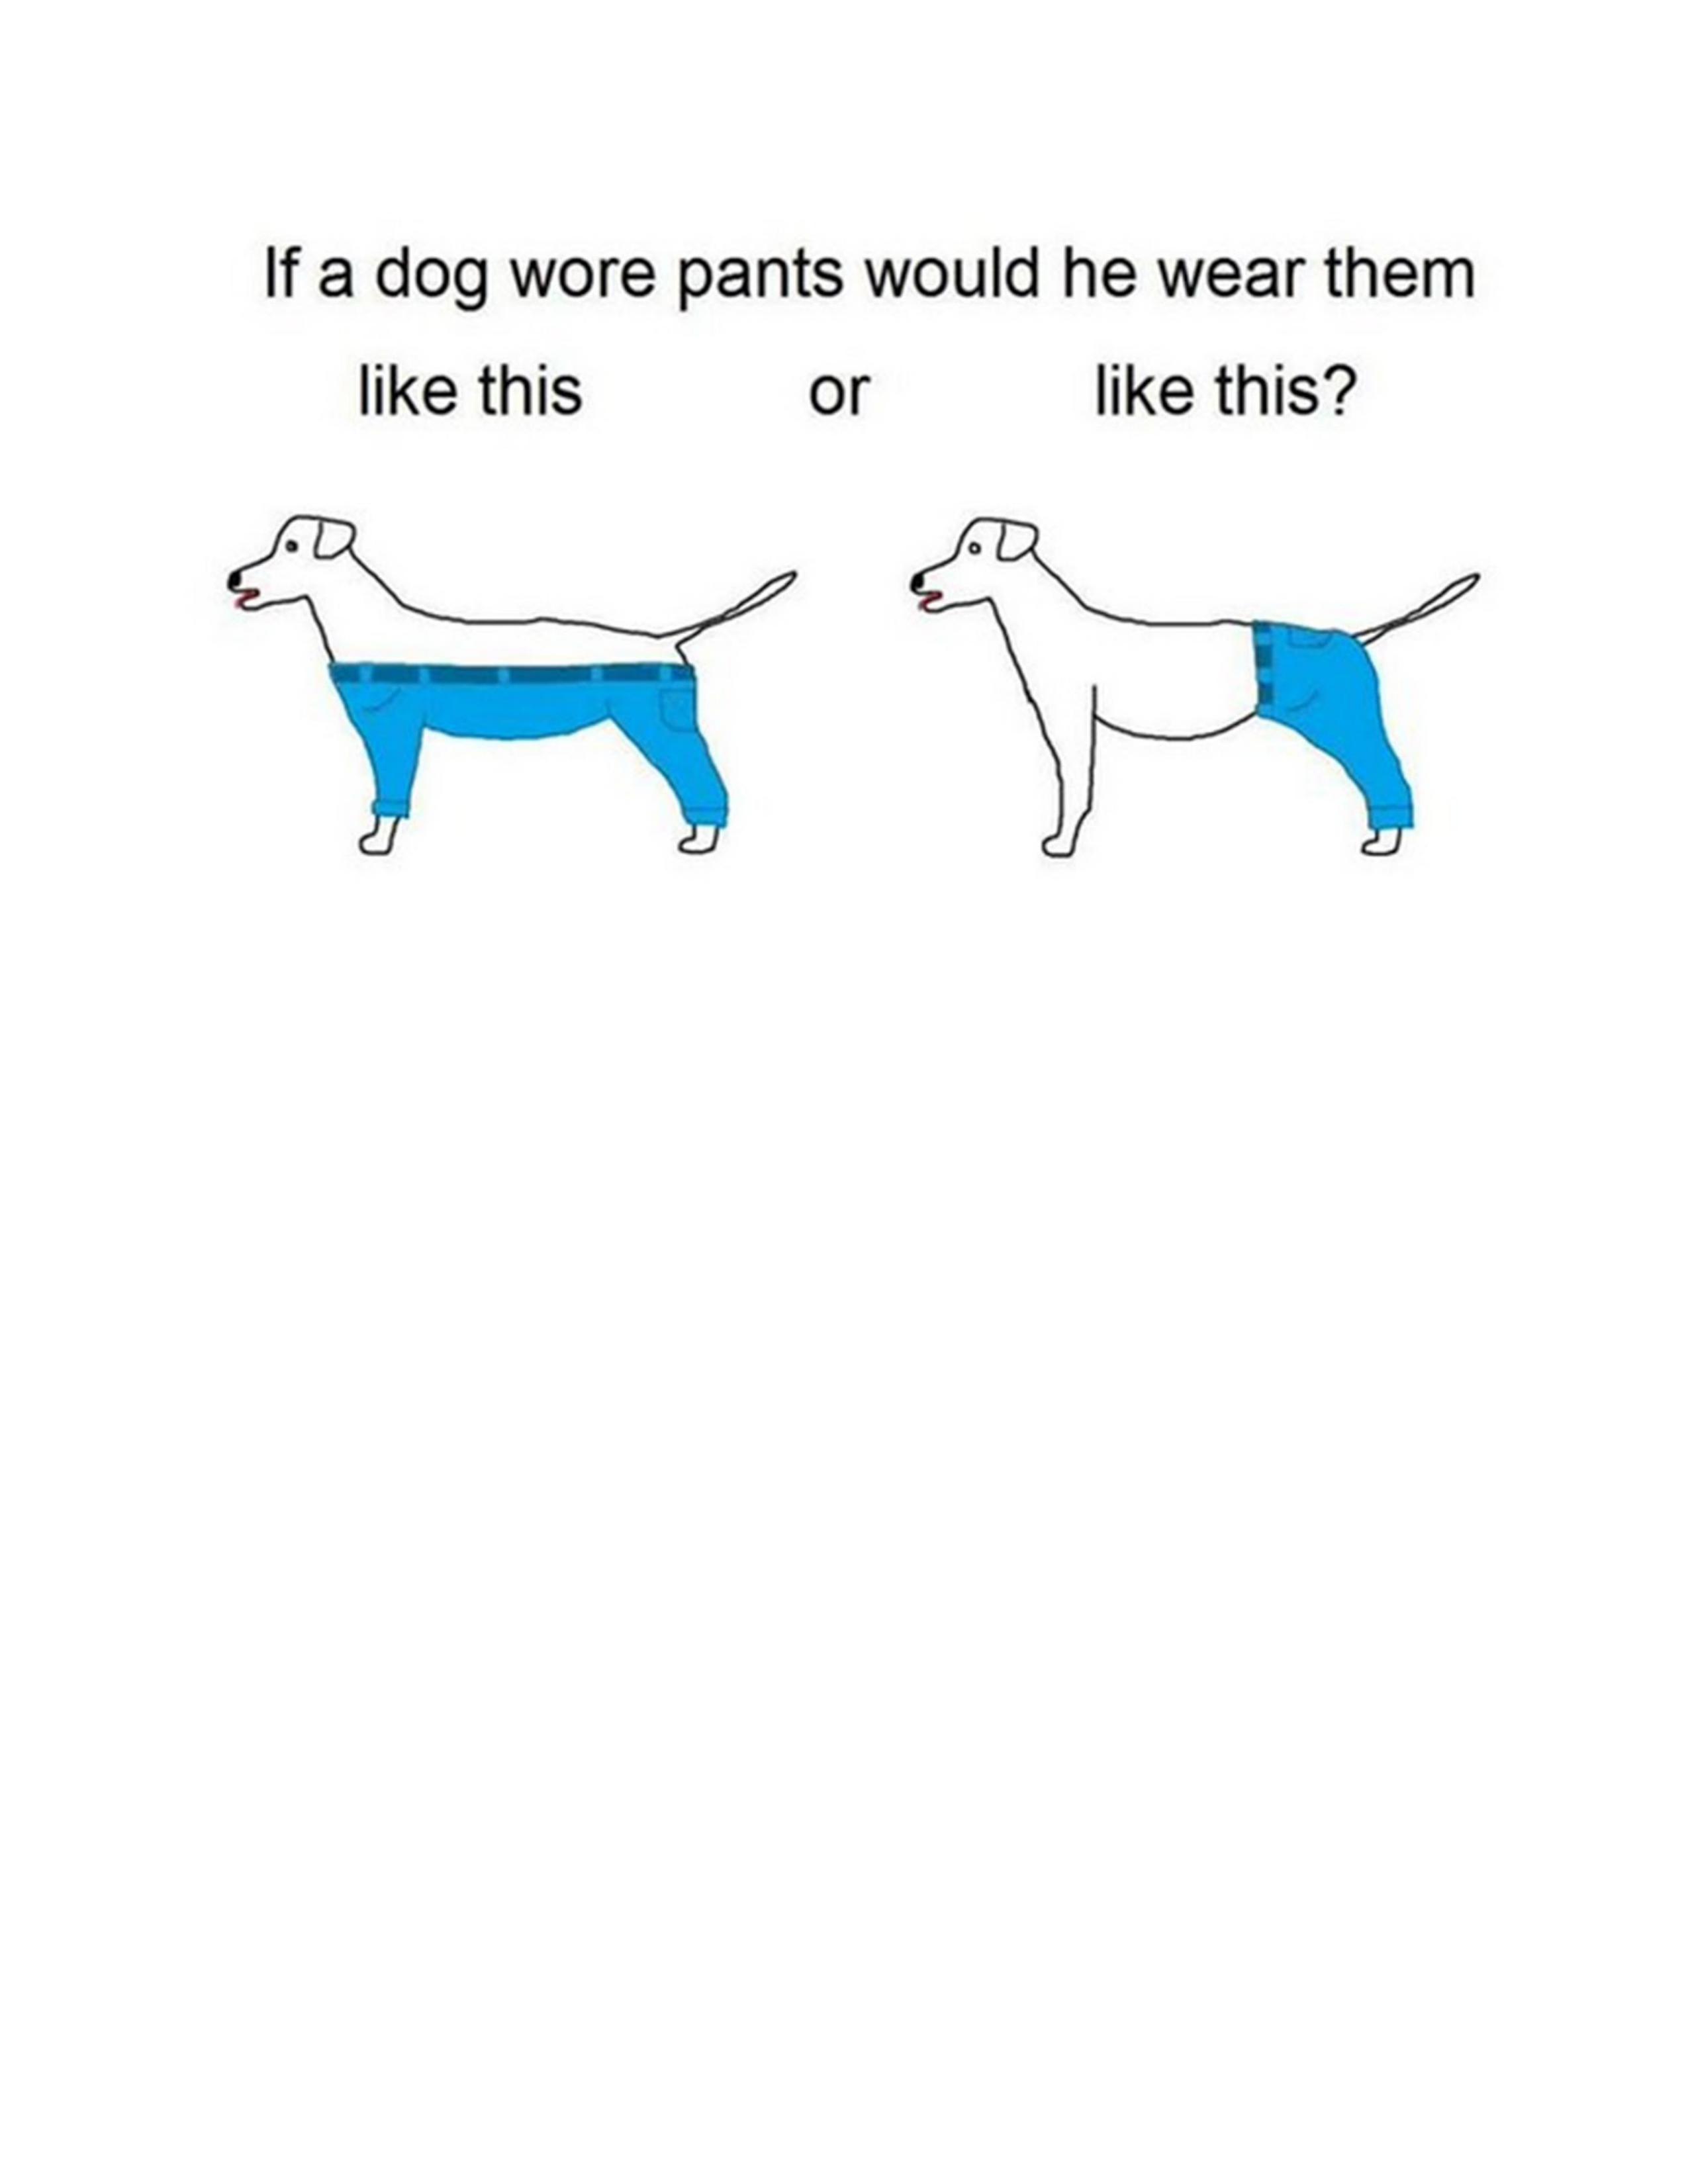 How do dogs wear britches?